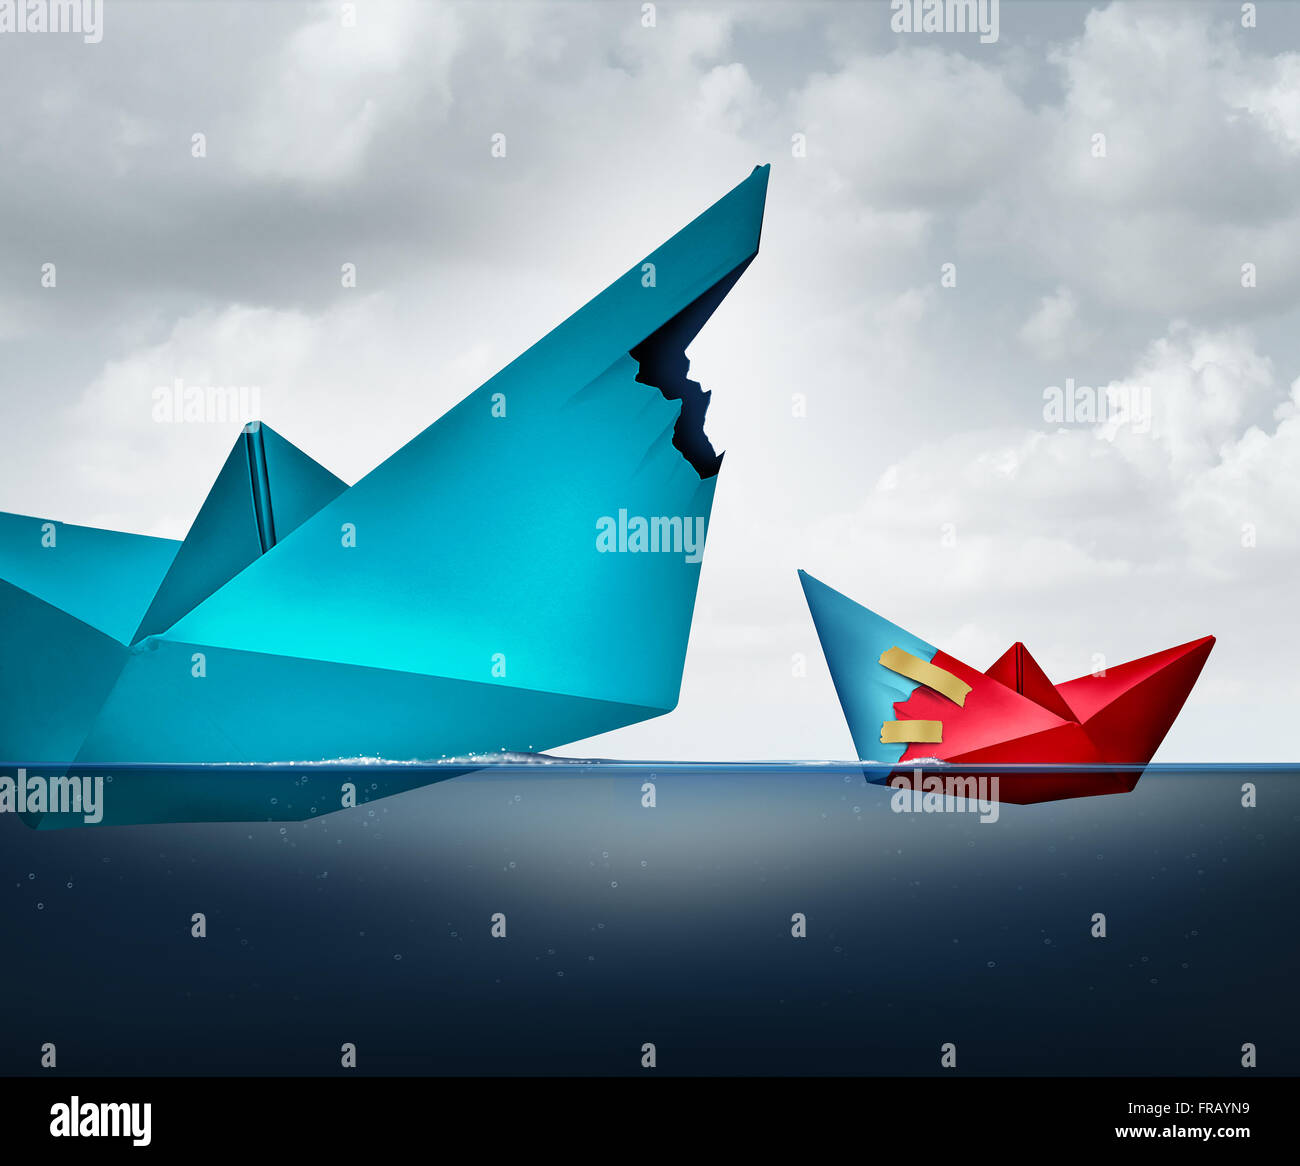 Big business support concept as a giant paper boat sharing a piece of the ship with a smaller vessel as a lending and assistance metaphor for funding and financing. Stock Photo